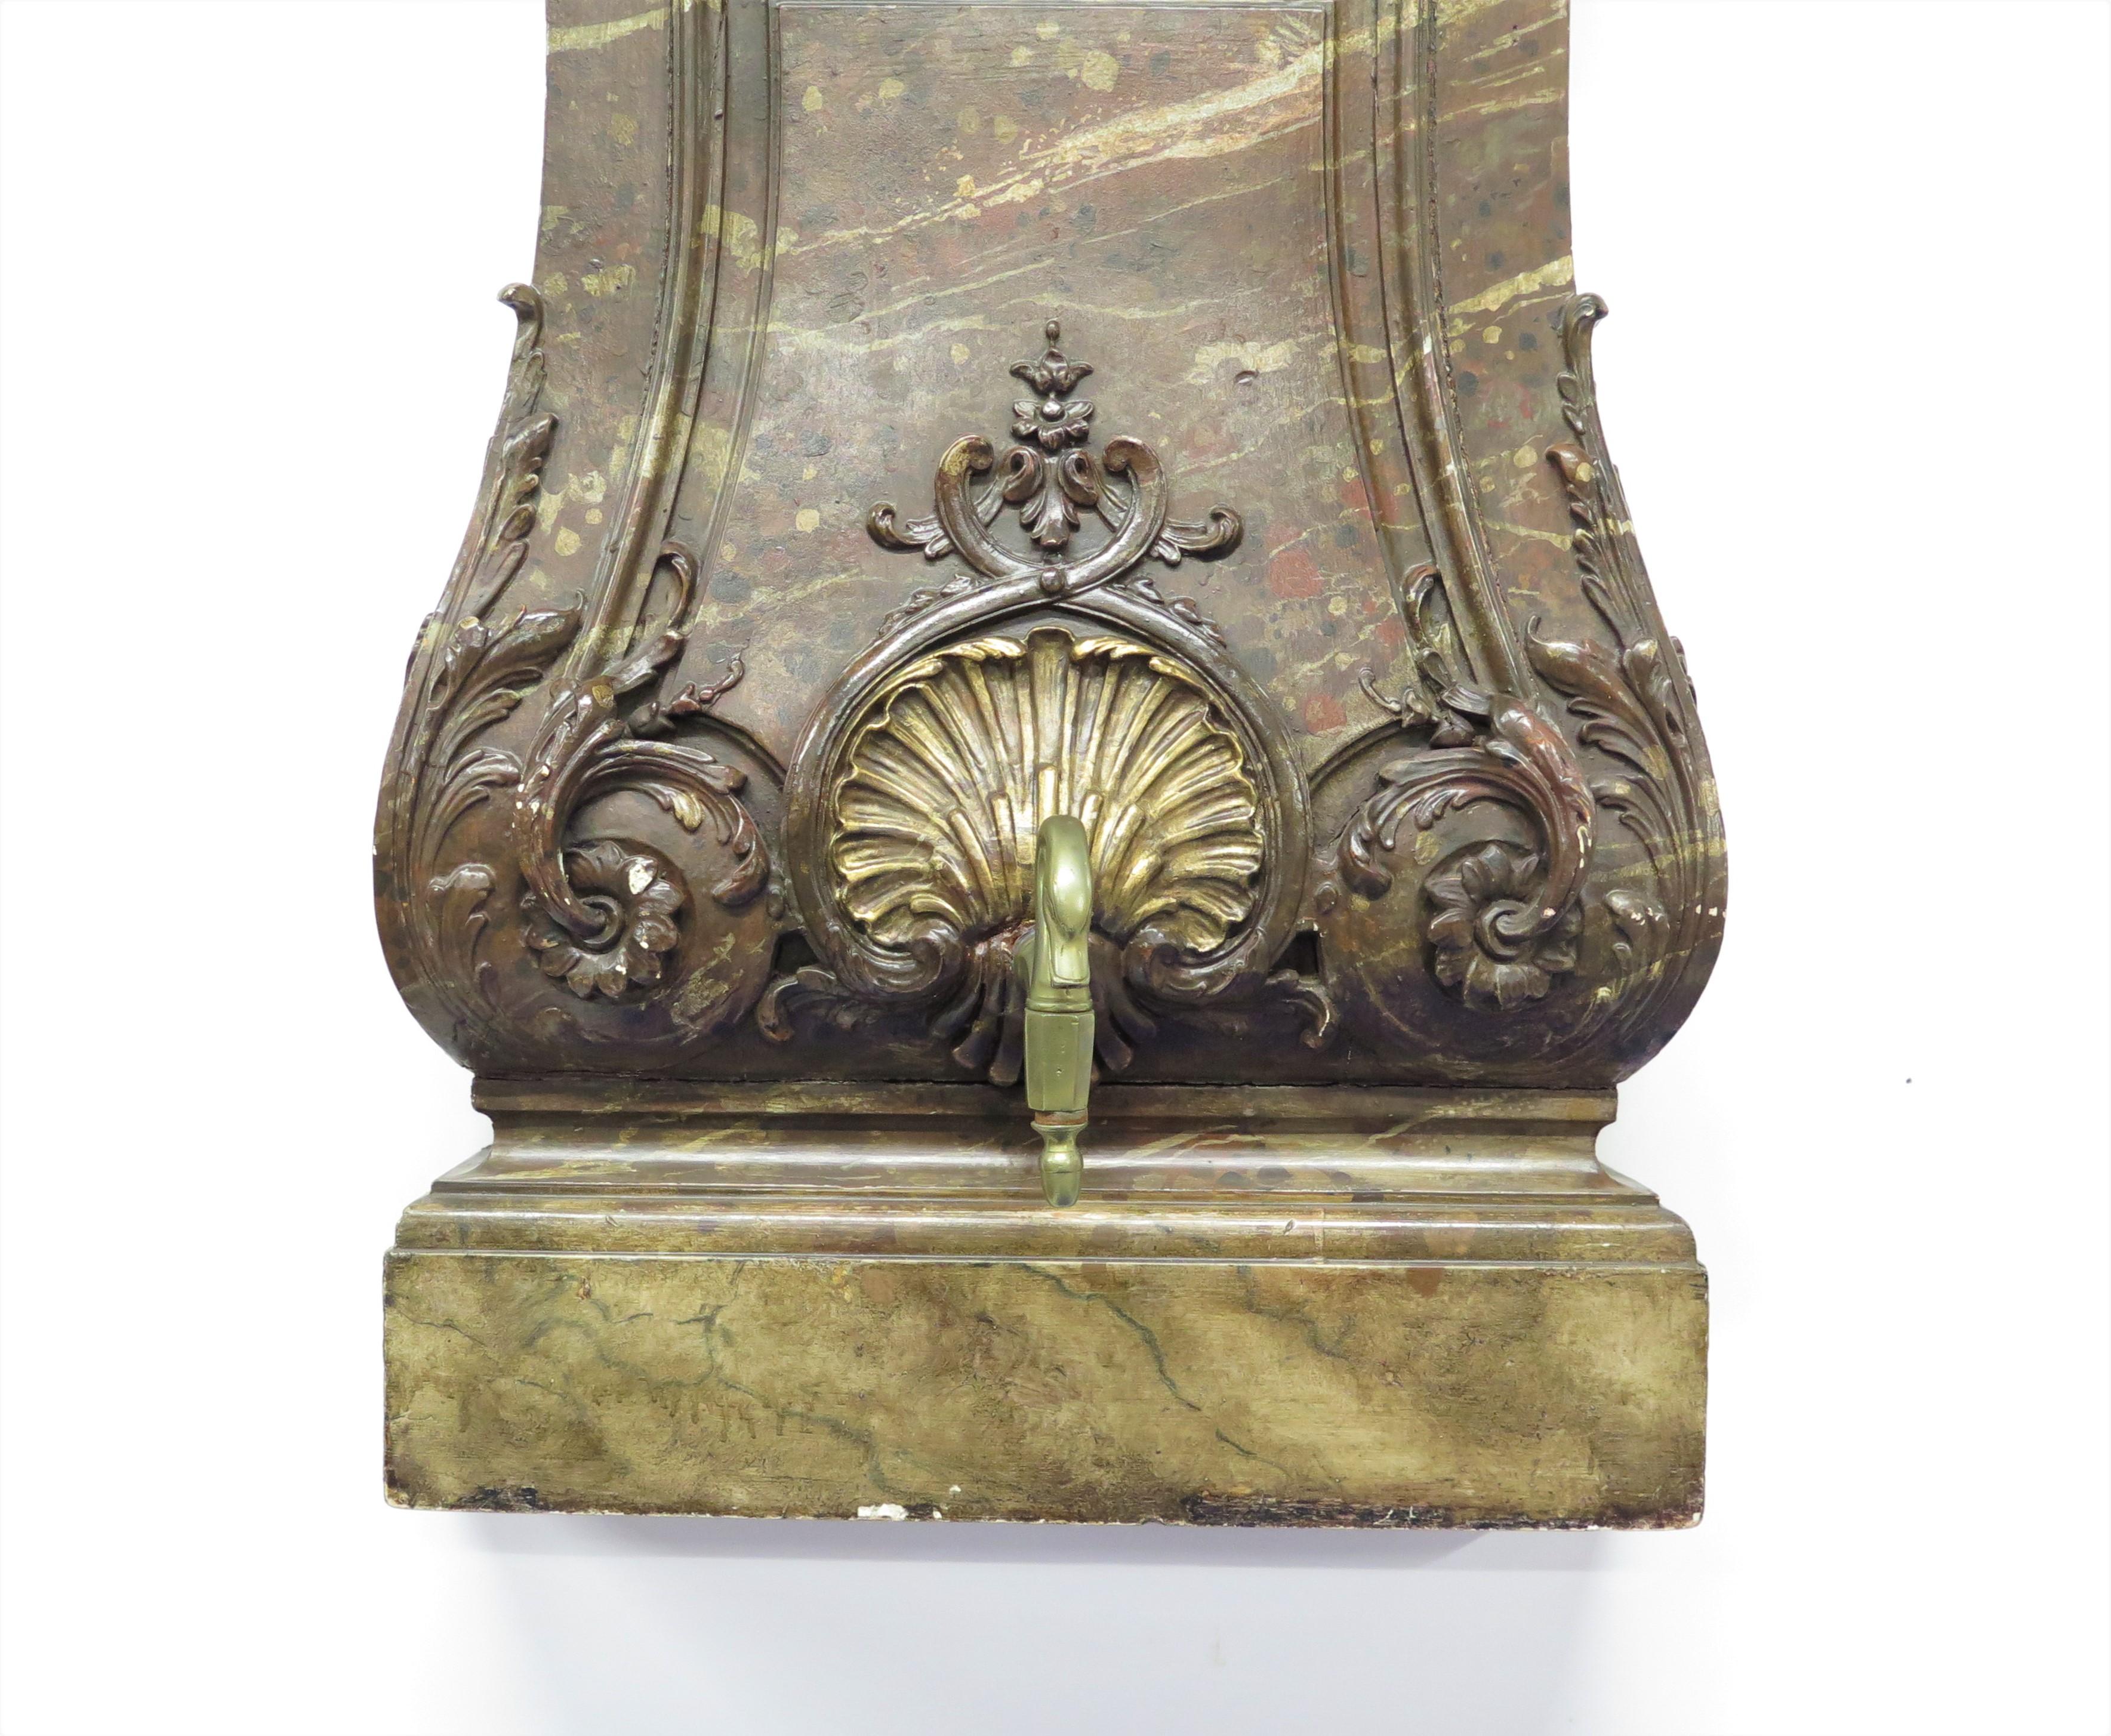 Hand-Carved 19th Century Italian Grand Scale Wall Mounted Lavabo For Sale